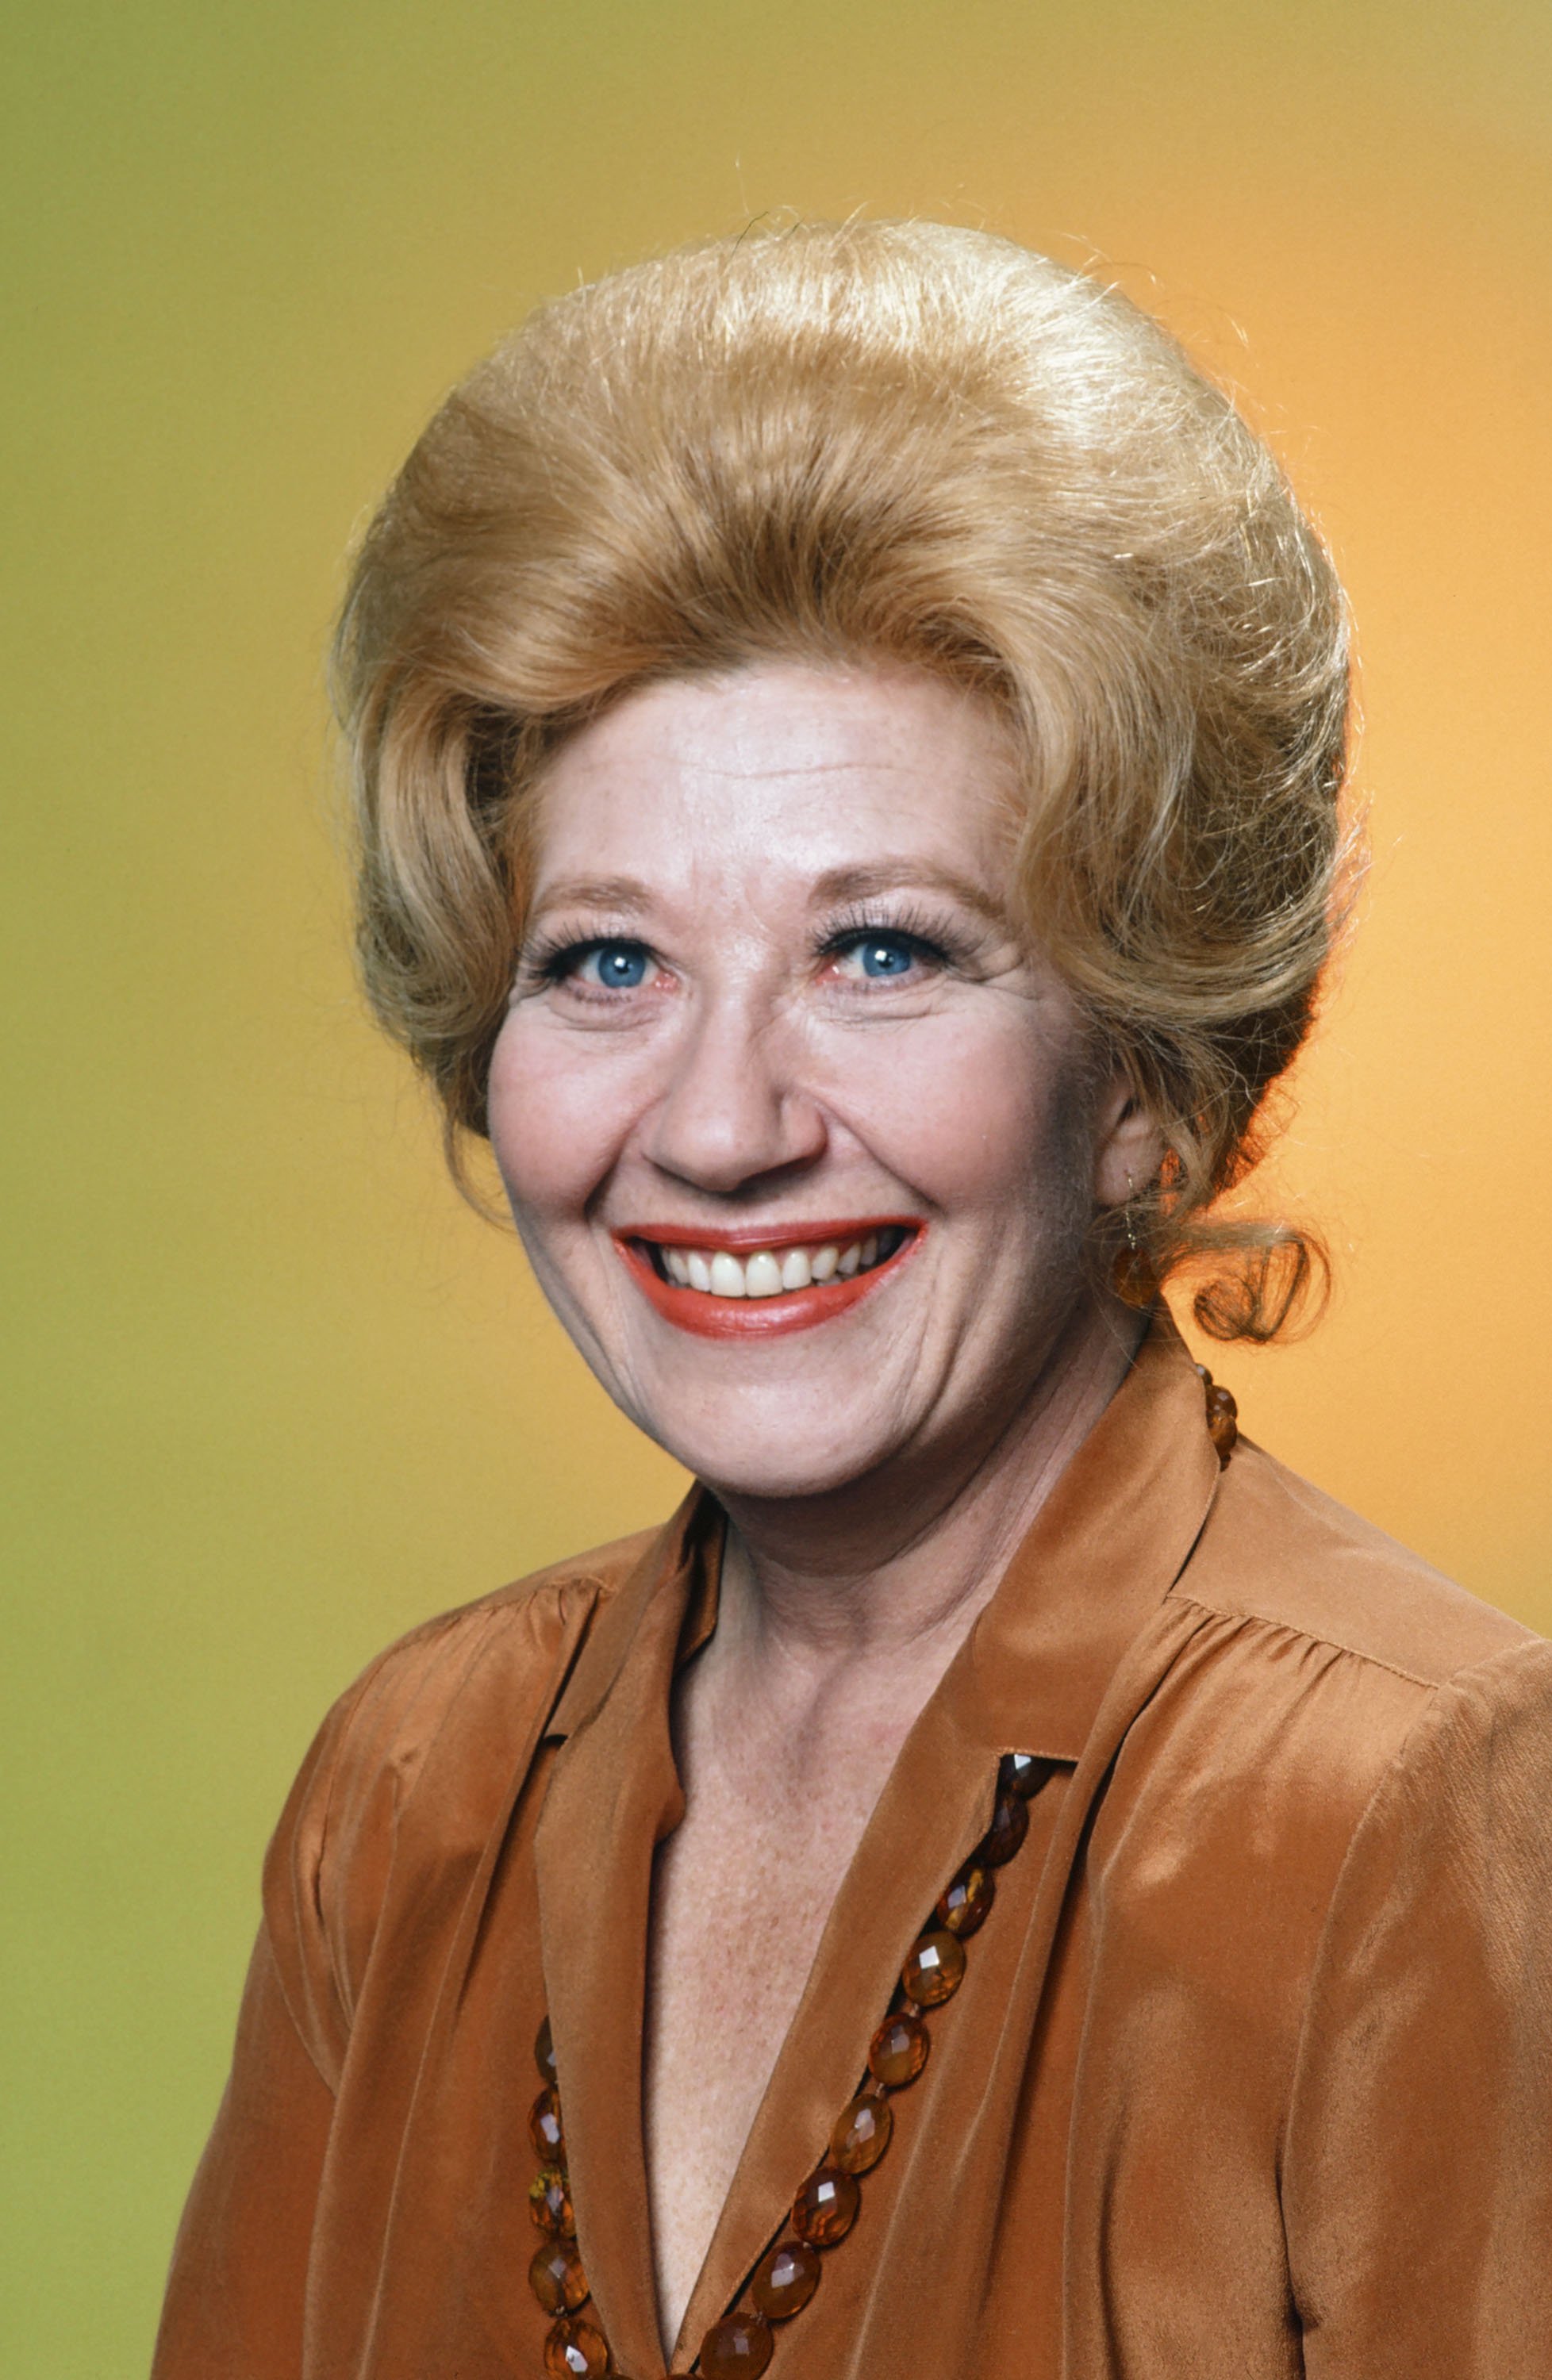 Charlotte Rae on the set of "The Facts of Life" | Source: Getty Images